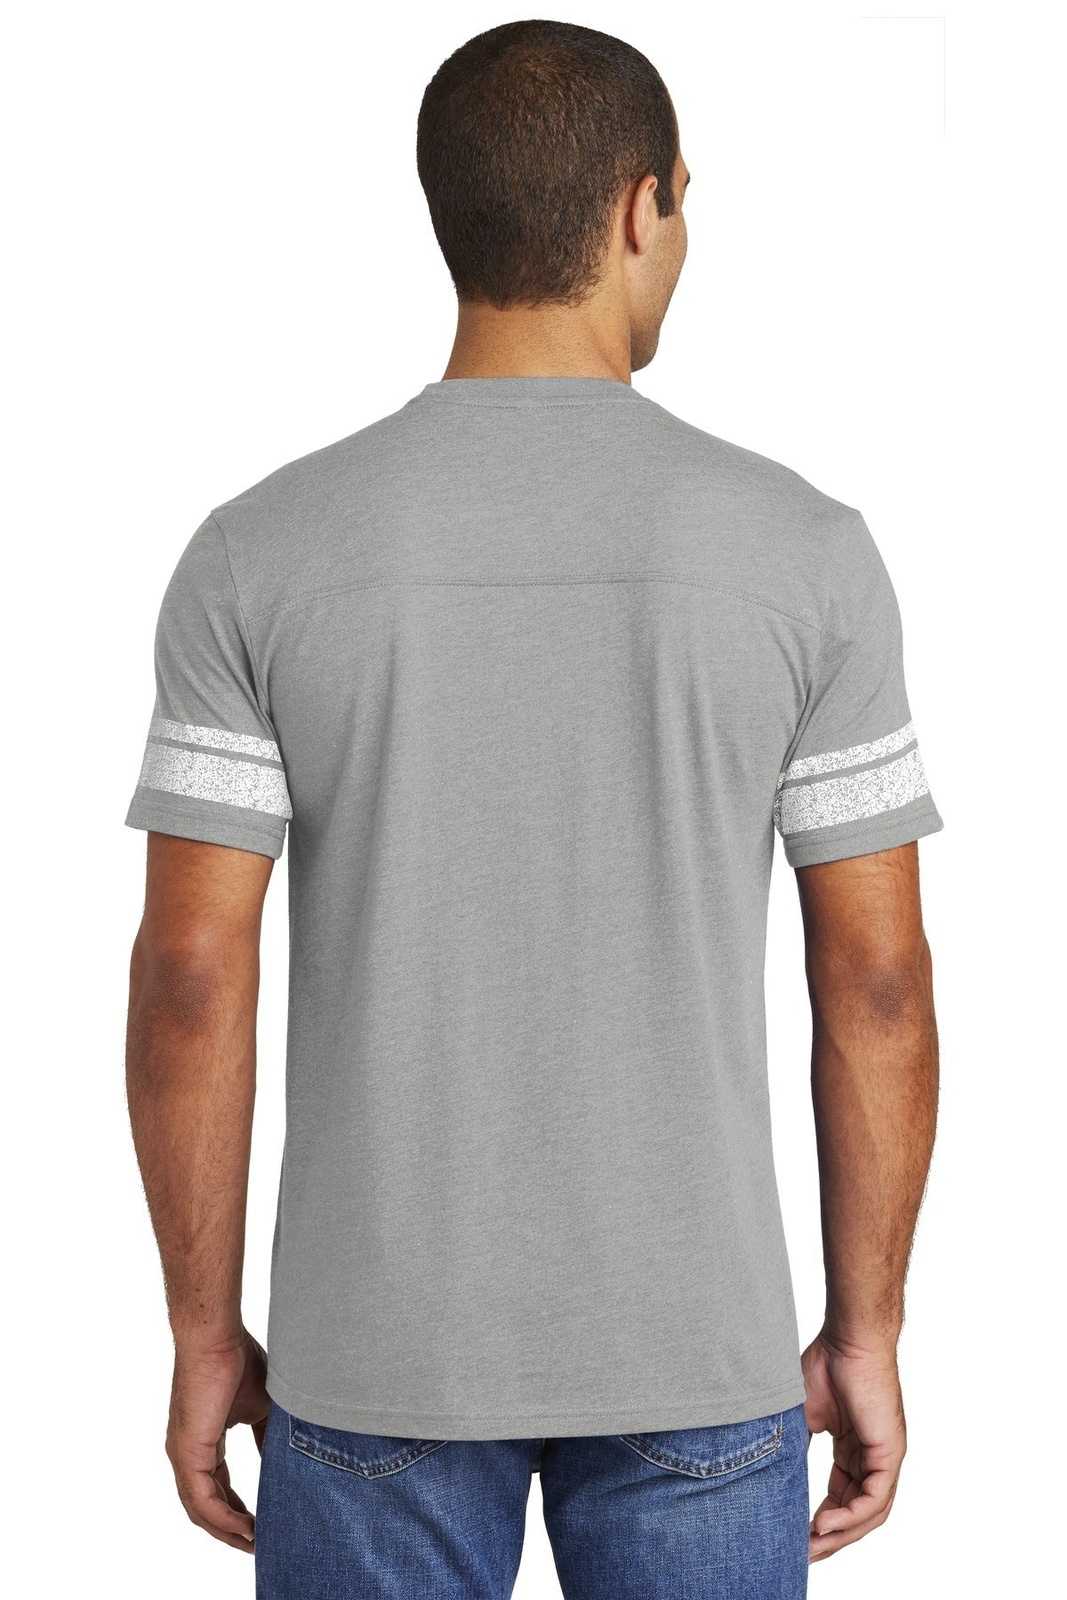 District DT376 Game Tee - Heathered Nickel White - HIT a Double - 2